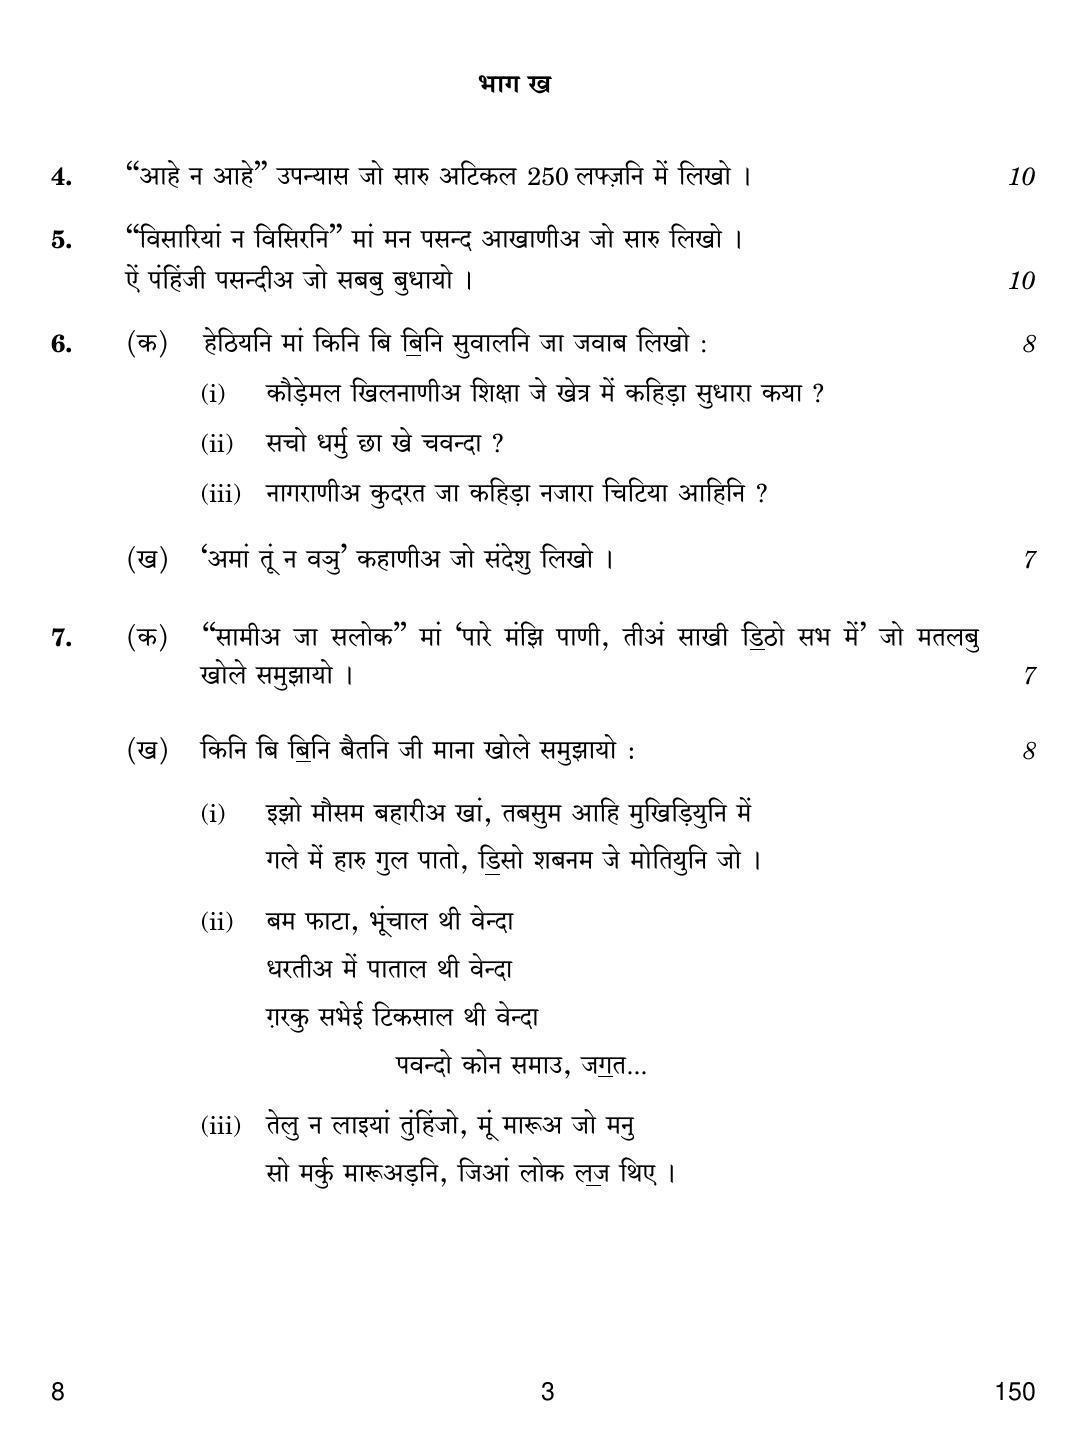 CBSE Class 12 8 SINDHI 2018 Question Paper - Page 3